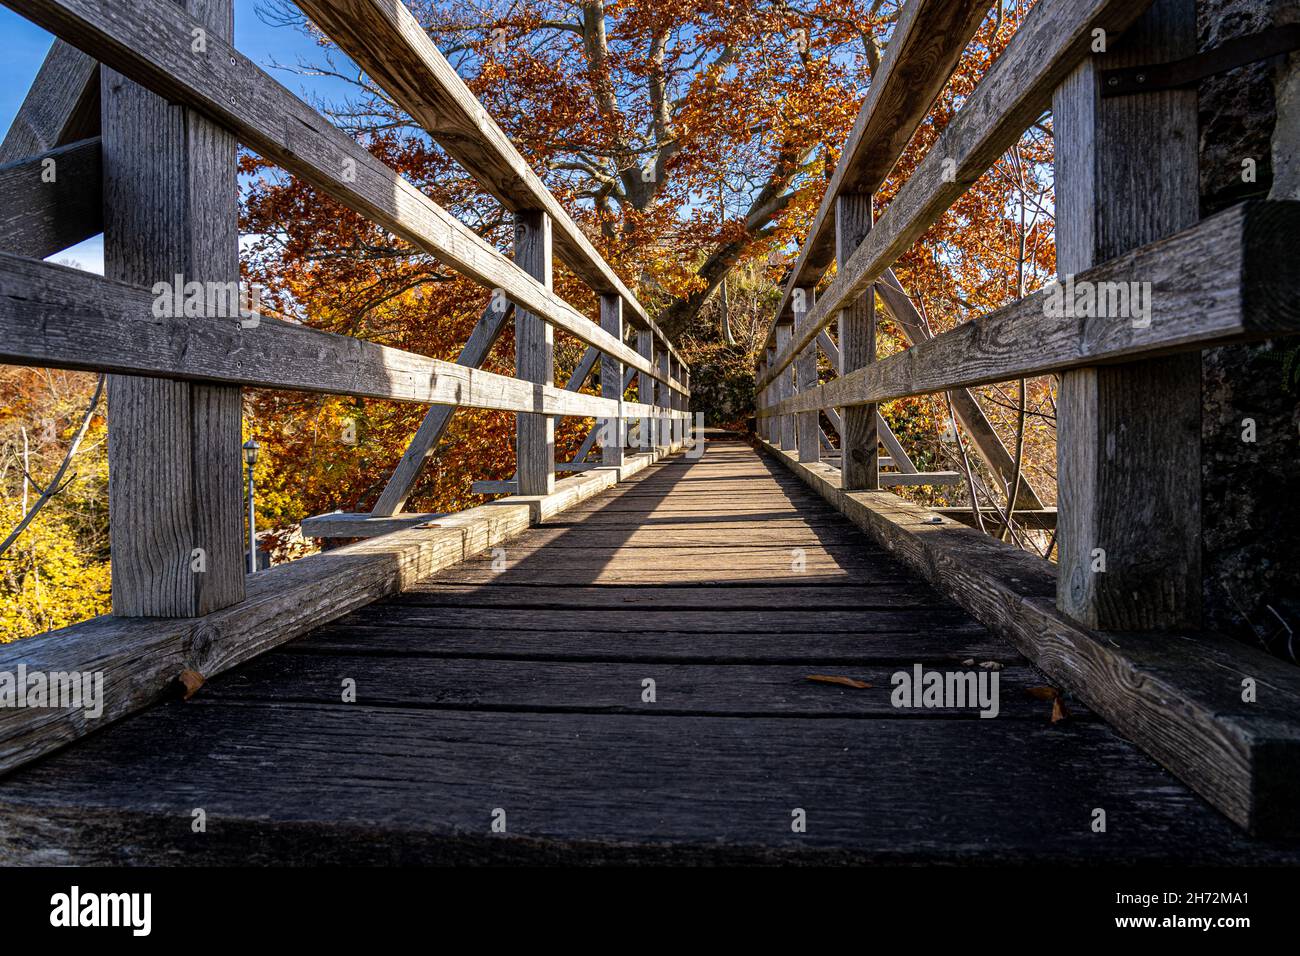 Wooden bridge towards a tree with golden leaves Stock Photo